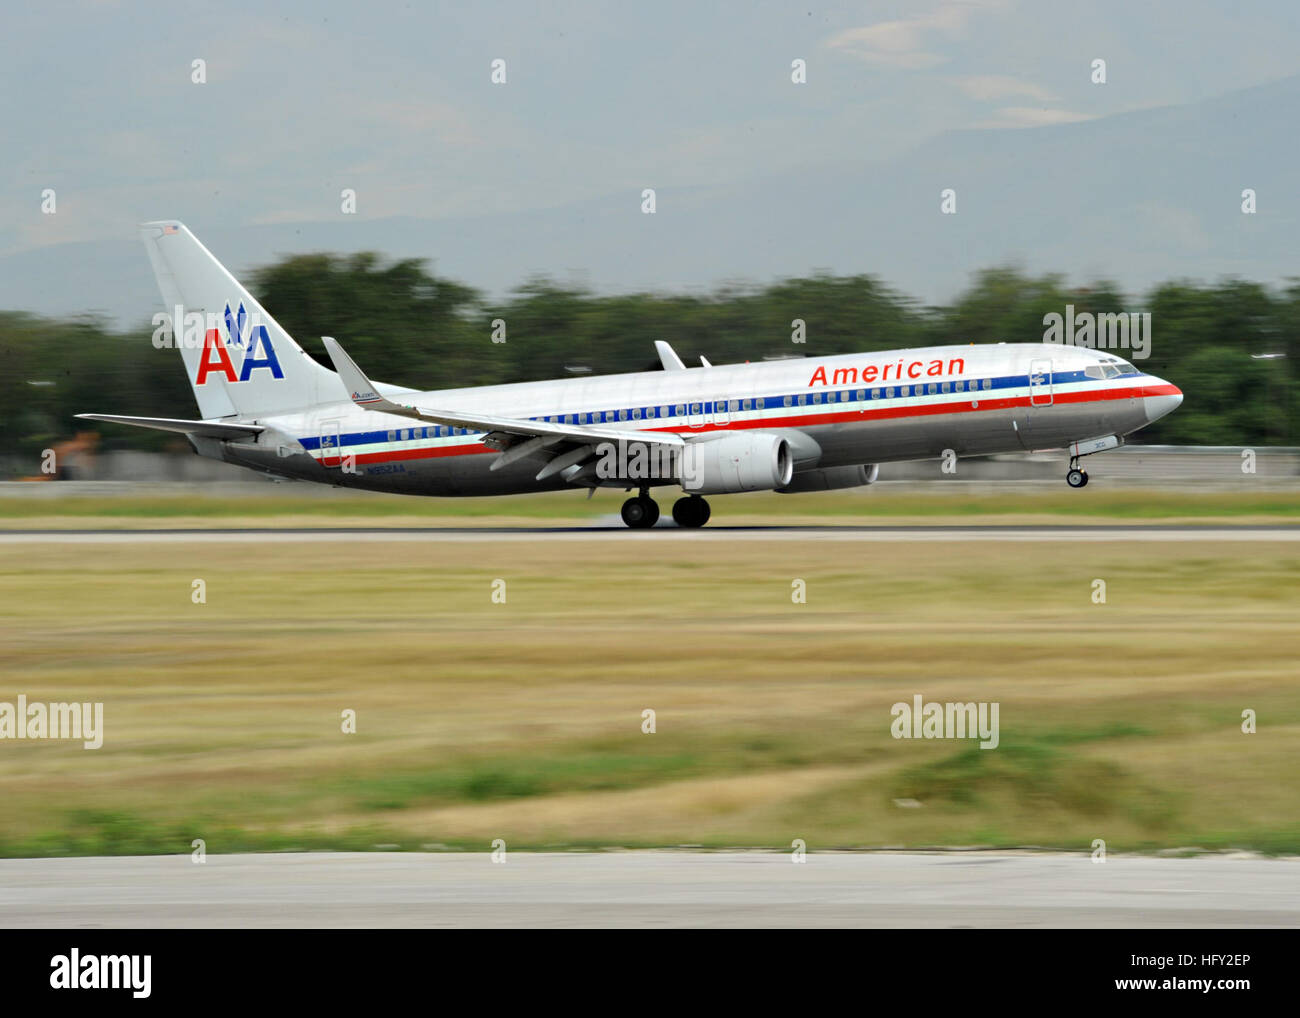 An American Airlines aircraft arrives at Toussaint Louverture International  Airport in Port-au-Prince, Haiti, Feb. 19, 2010. The flight, from Miami,  was the first commercial airline flight since a 7.0 magnitude earthquake  caused